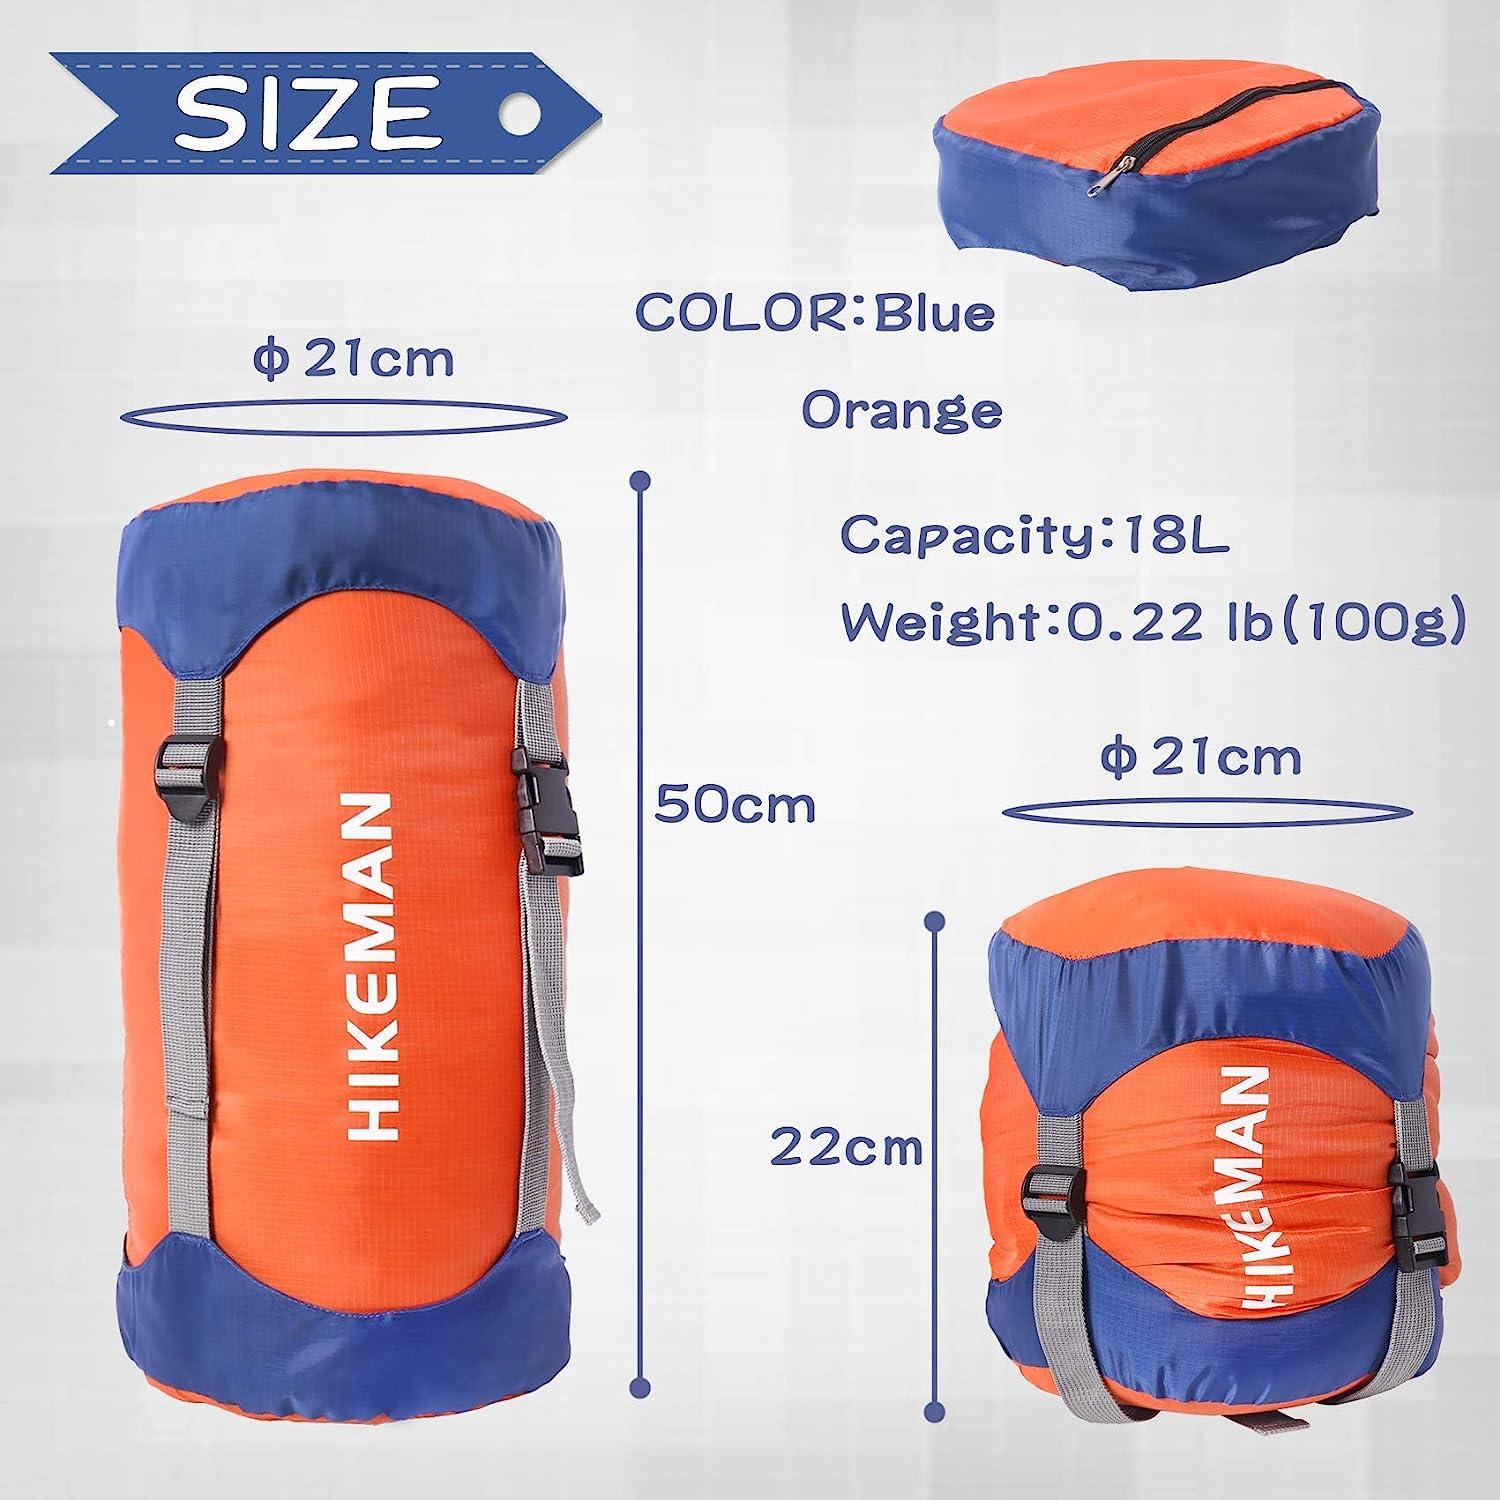 Compression Sack Water Resistant Ditty Bags Space Saving Storage Bag Ultralight Outdoor Compression Bag for Travel Canoeing Hiking Camping M, Men's